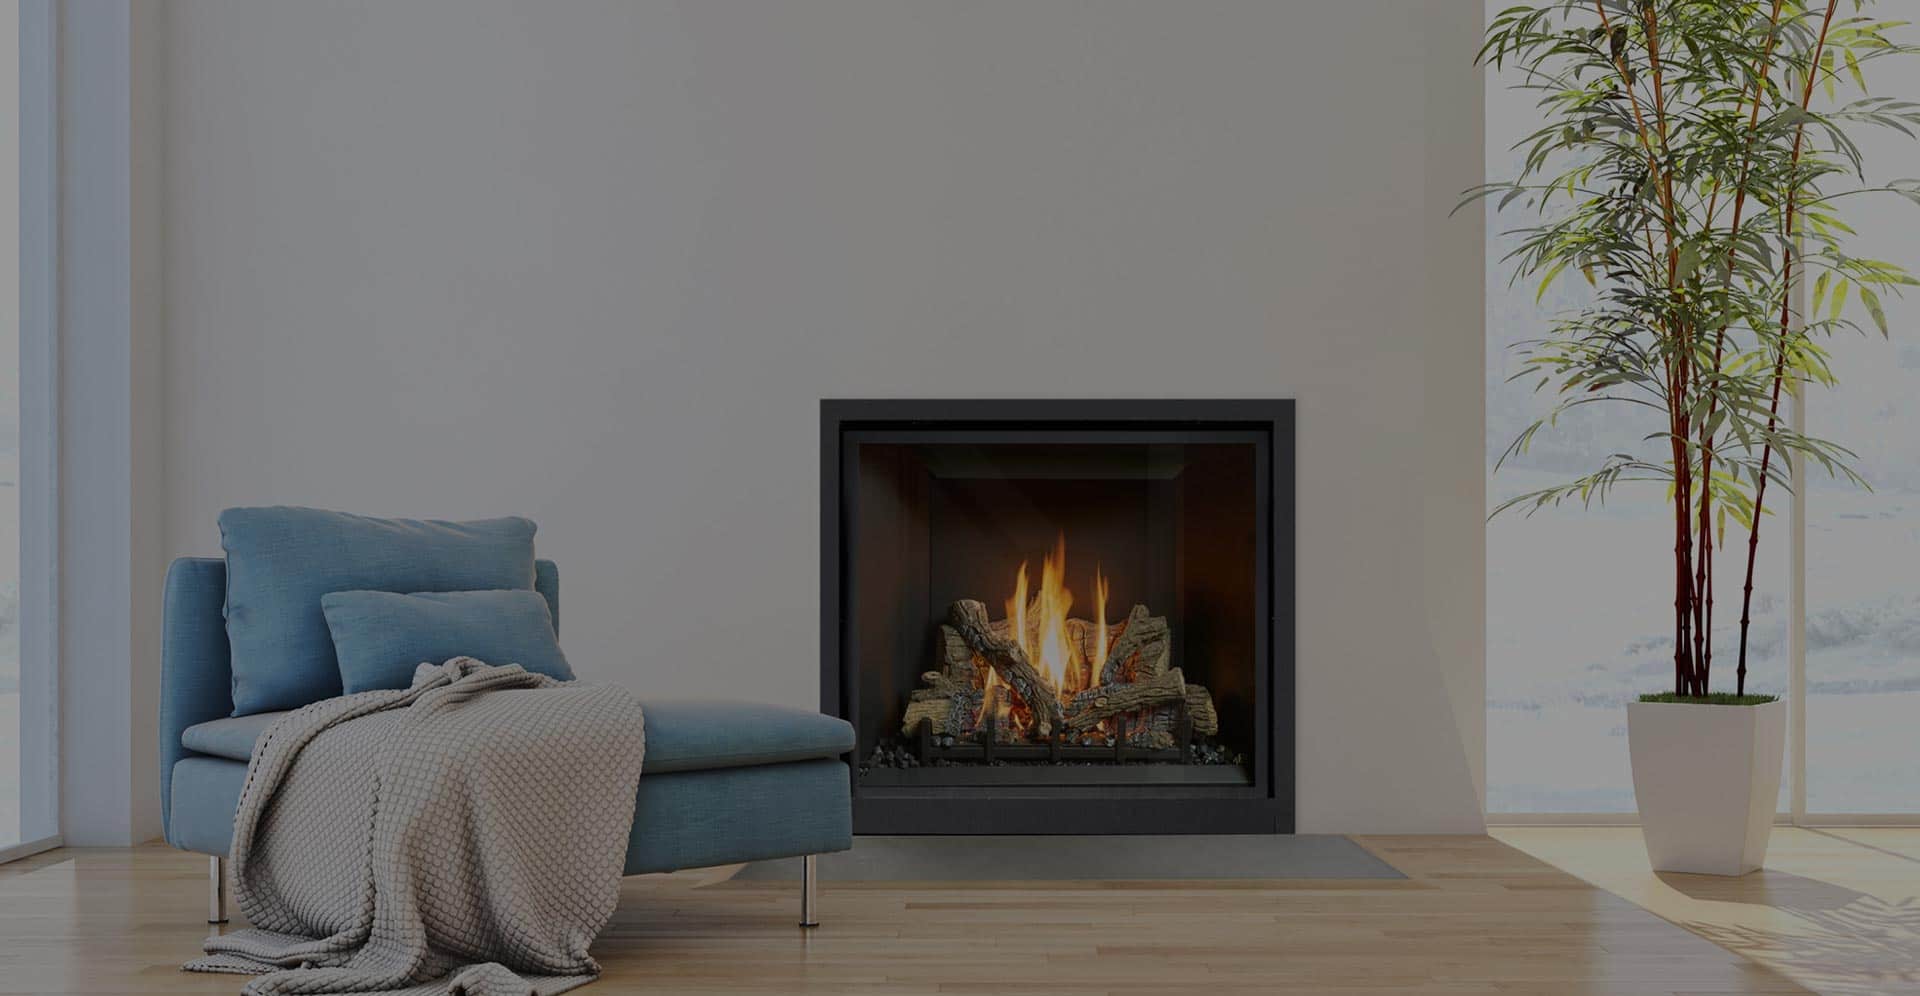 Where To Buy A Gas Fireplace